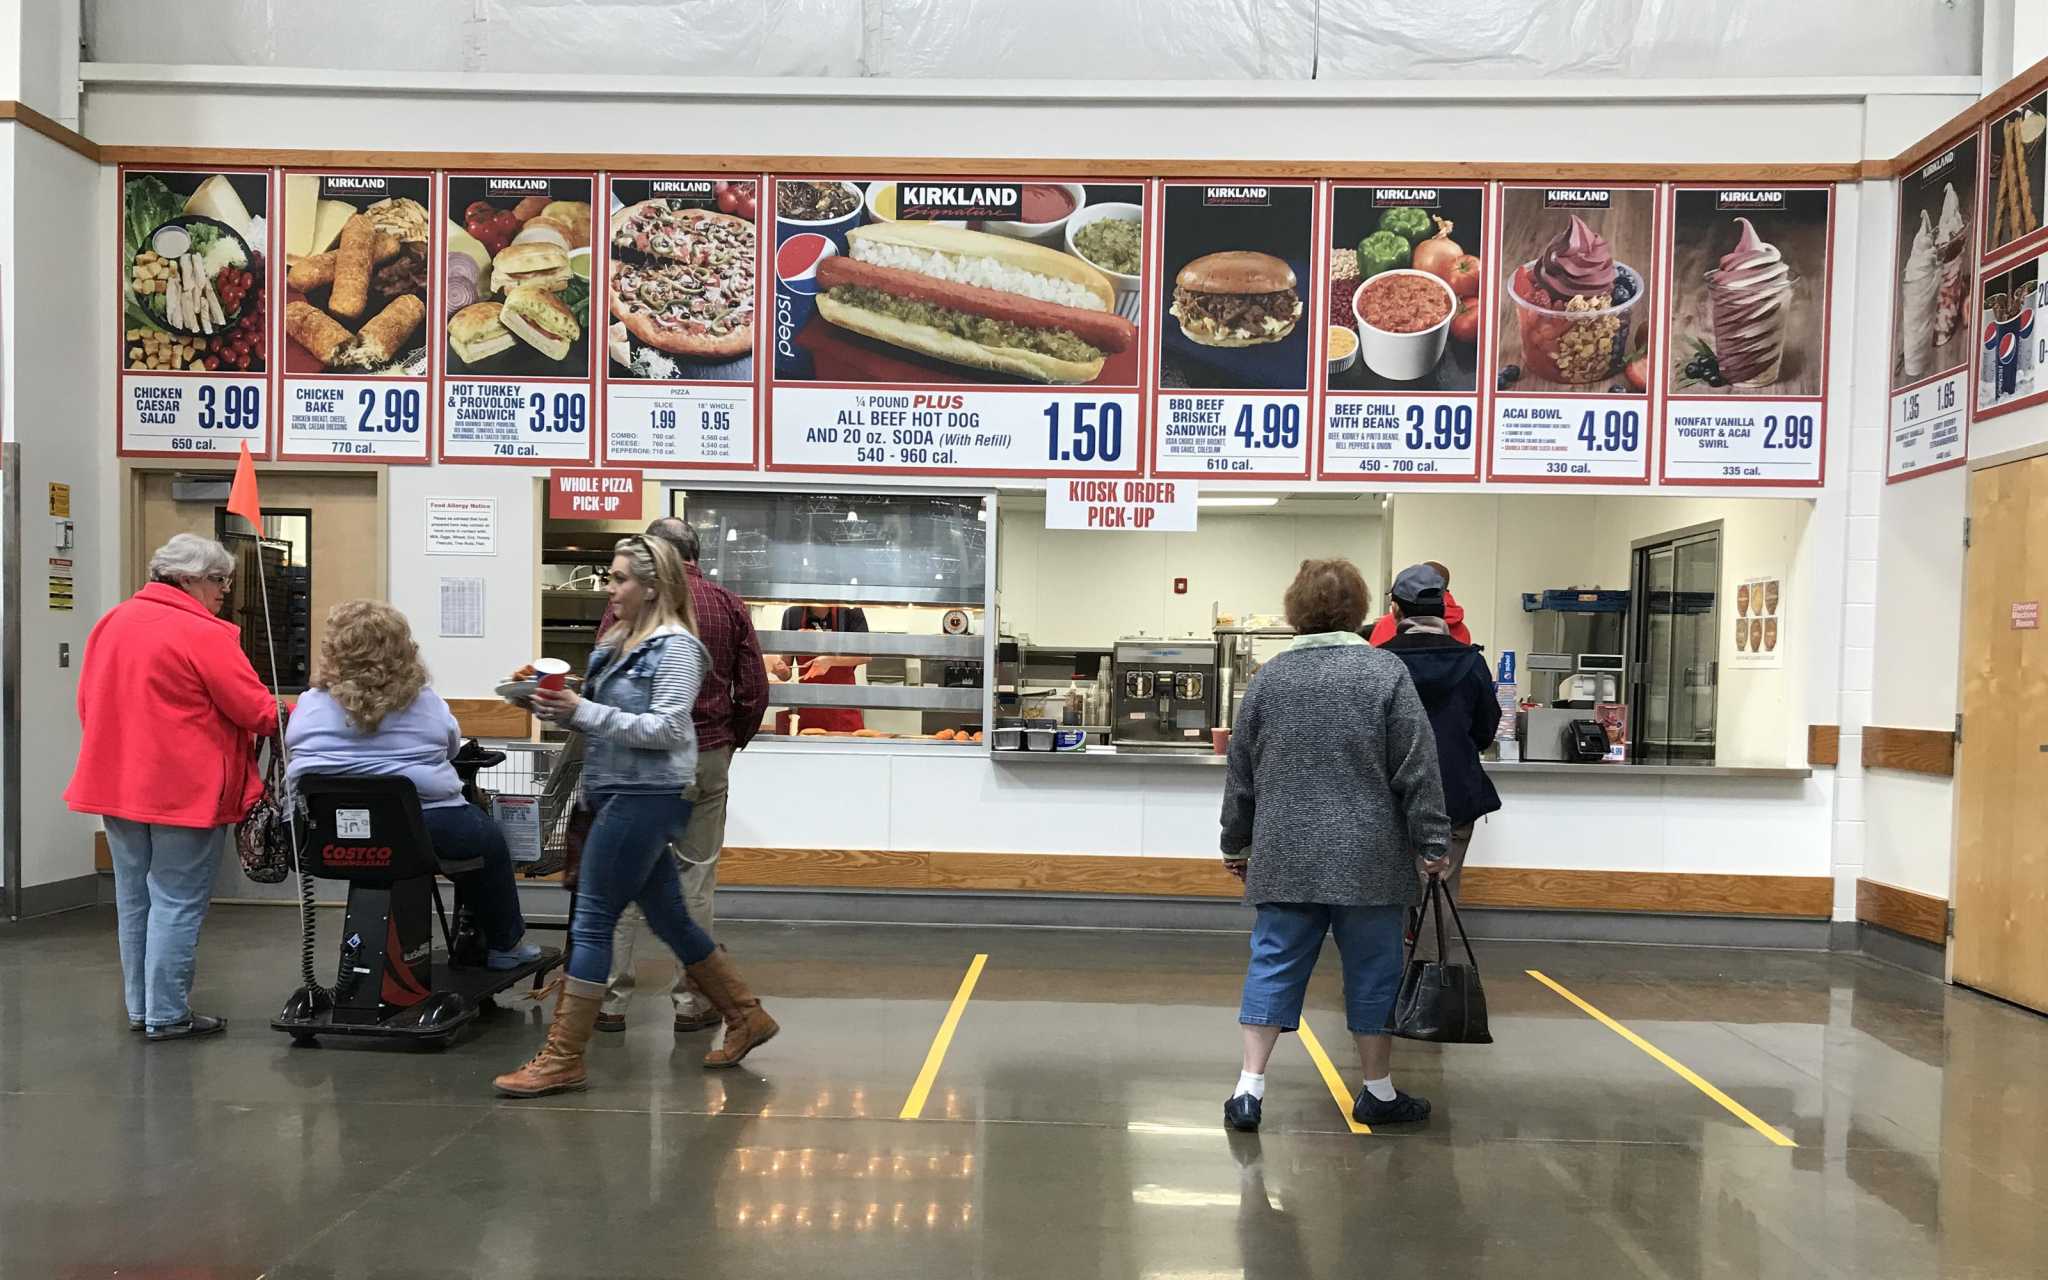 Costco eyes opening new Northern California store